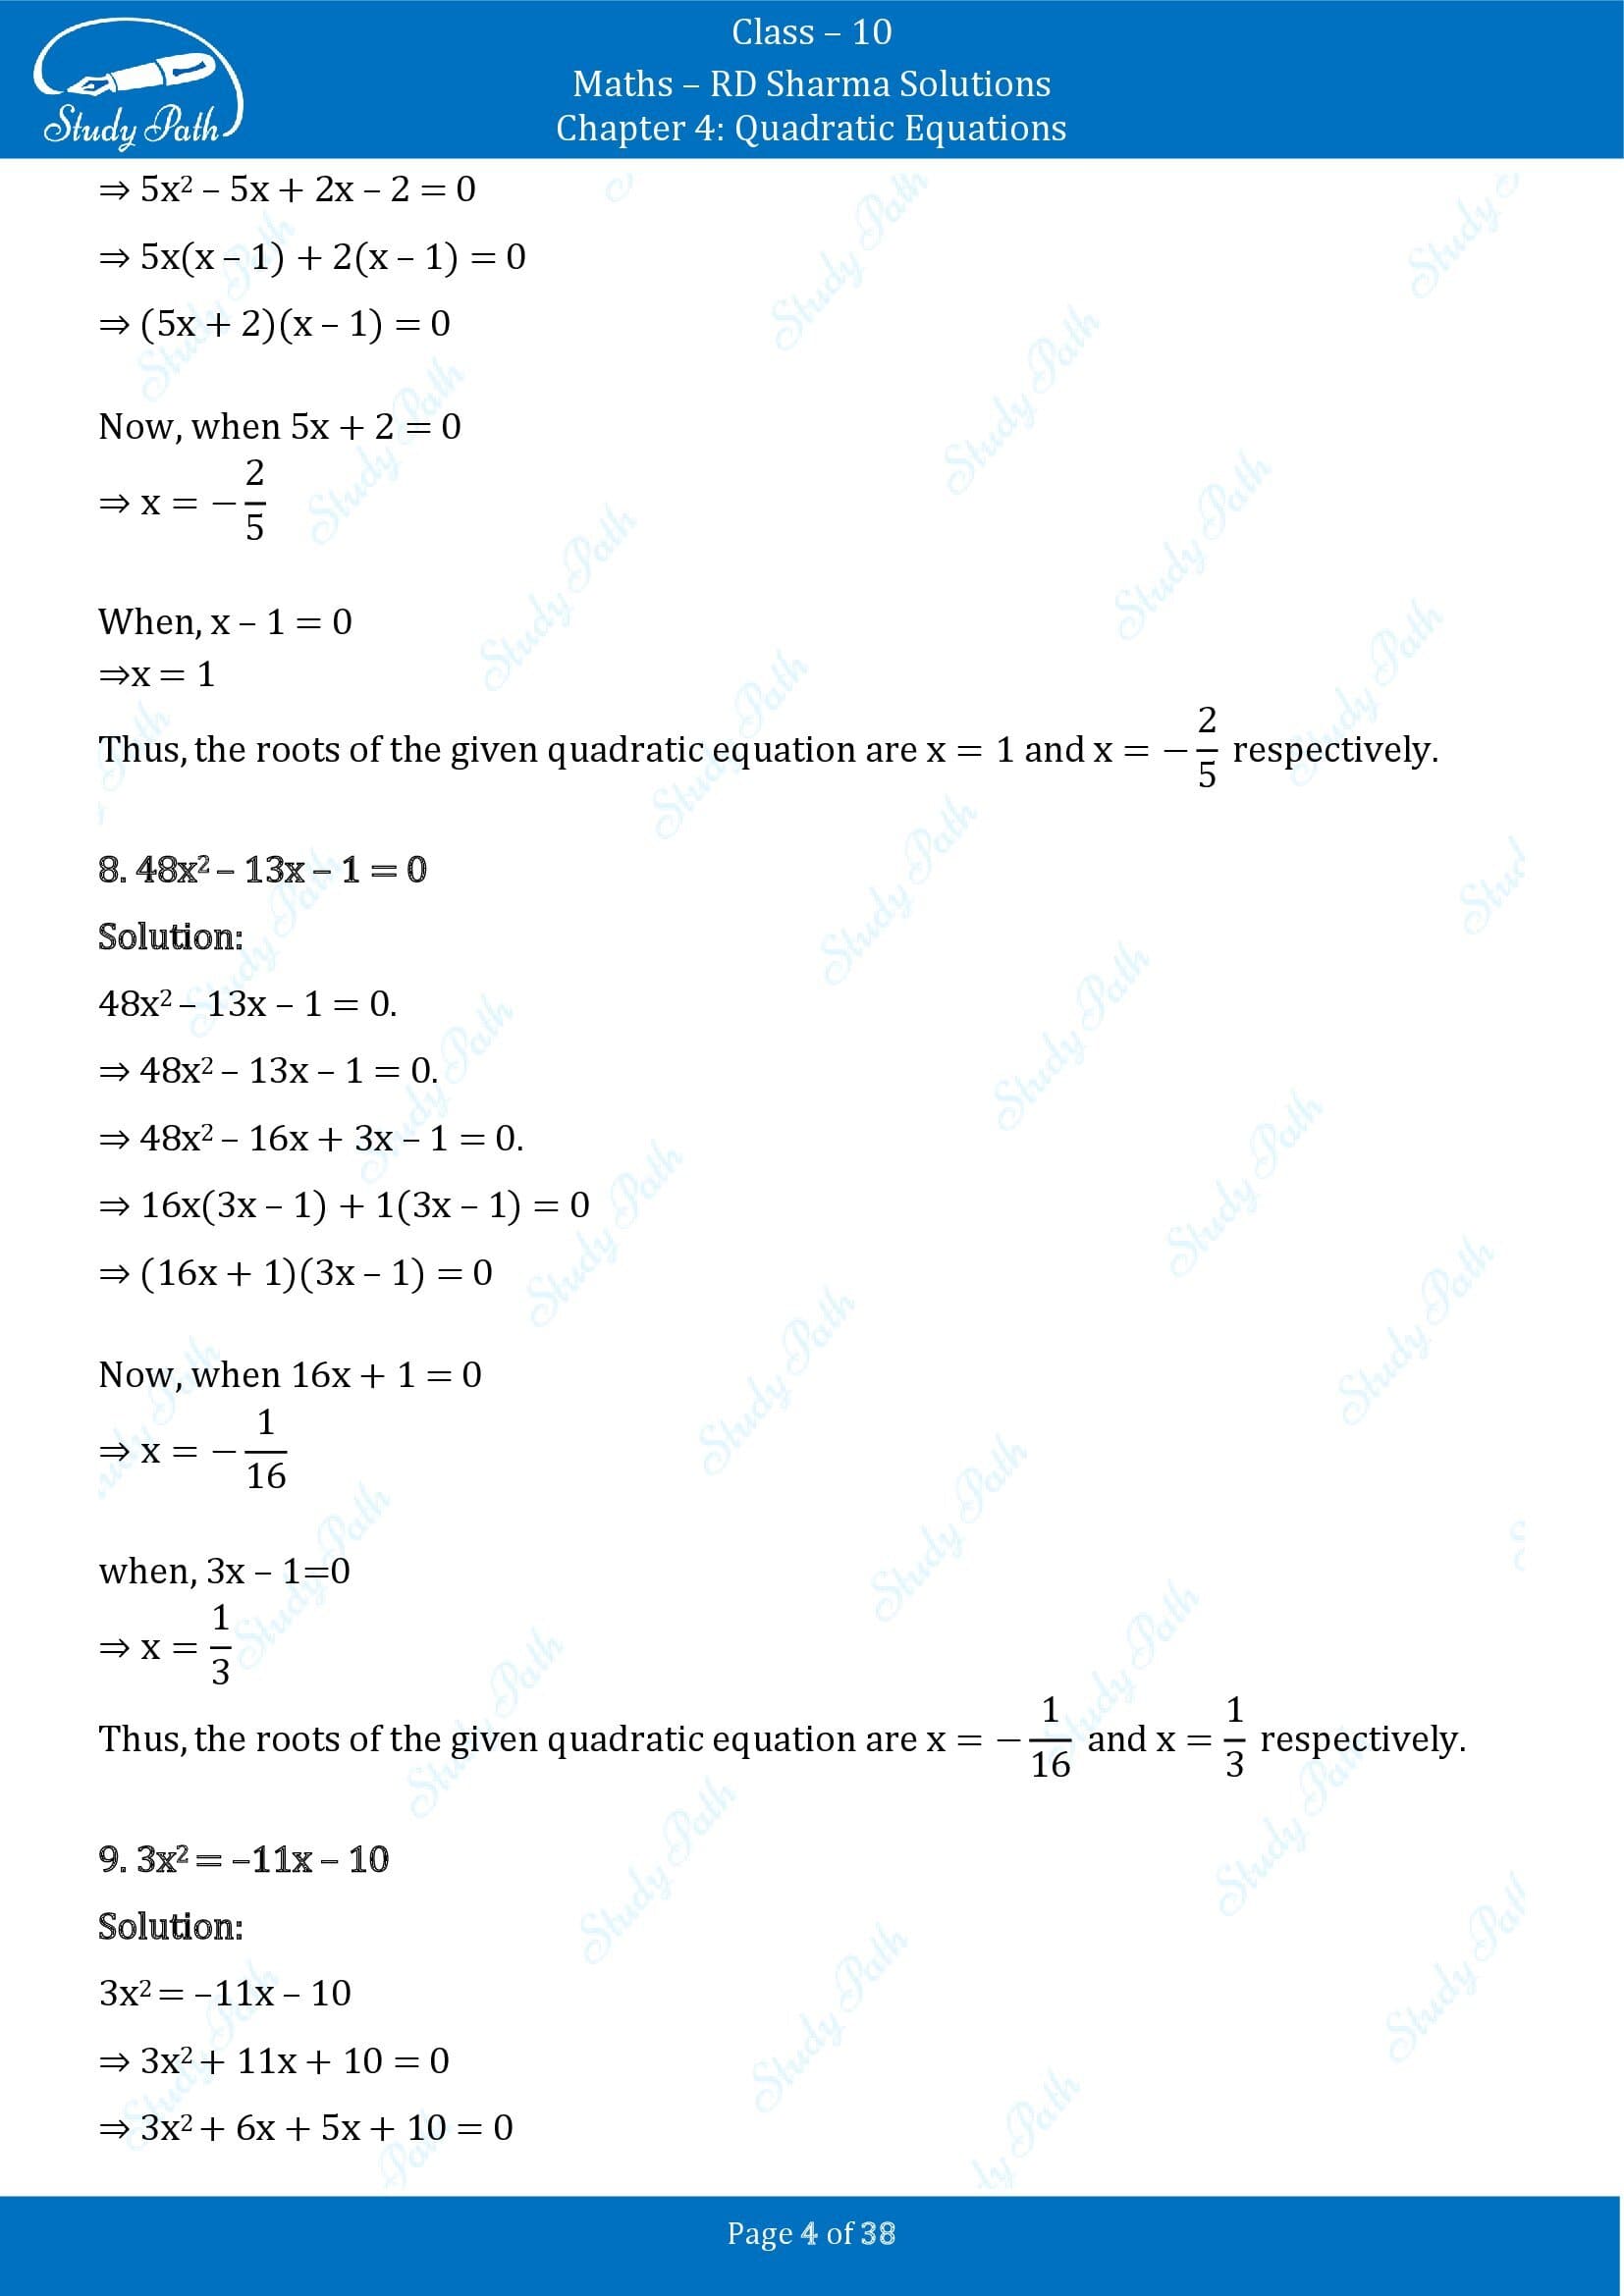 RD Sharma Solutions Class 10 Chapter 4 Quadratic Equations Exercise 4.3 00004